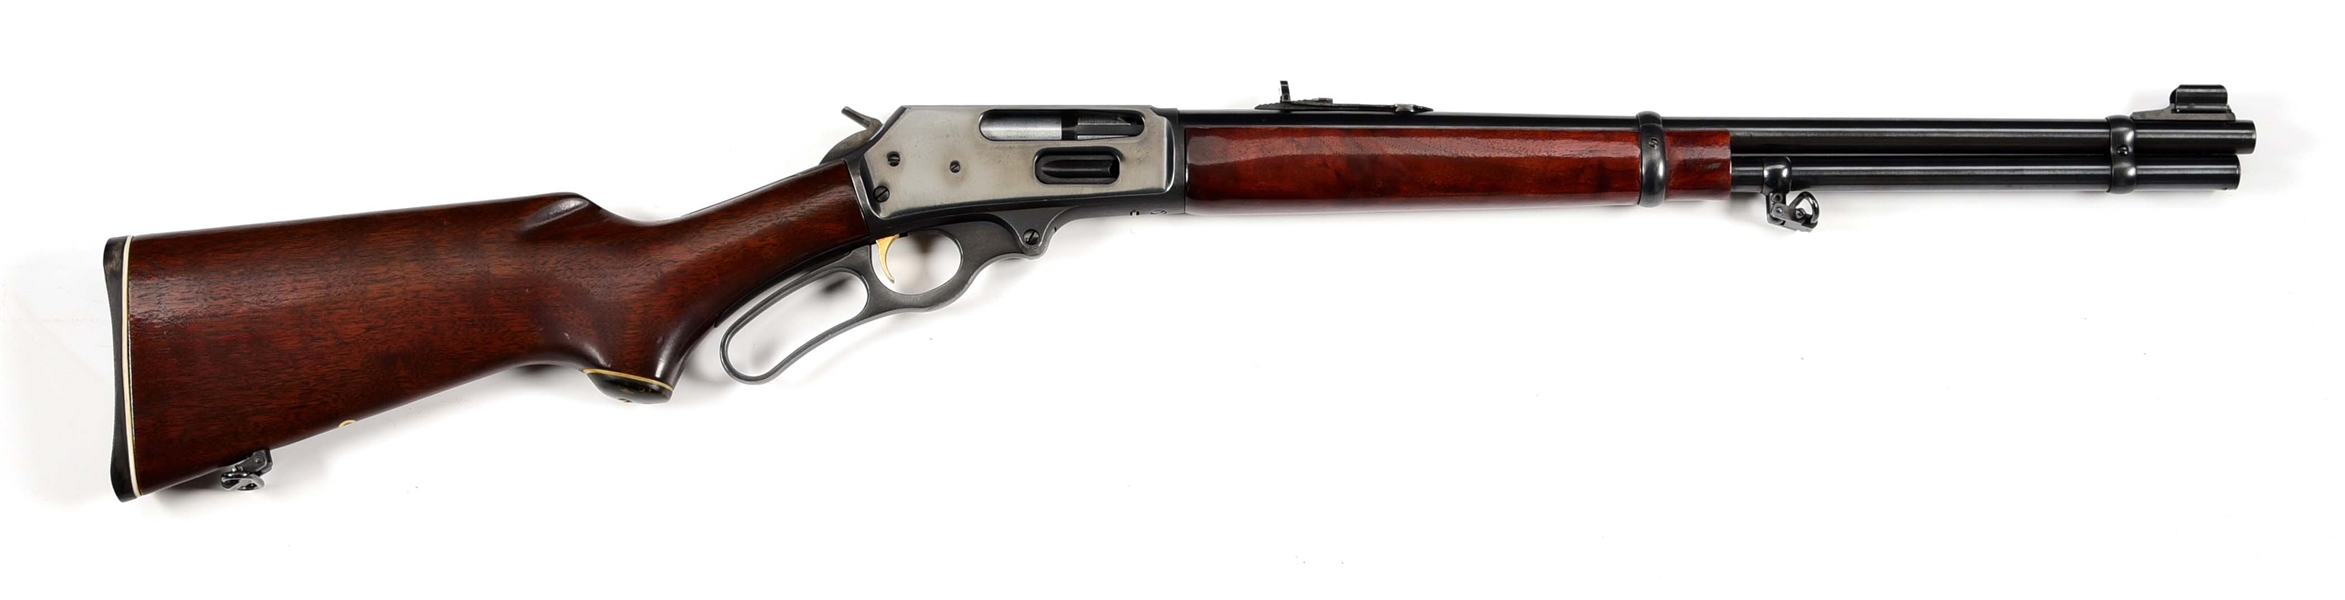 (M) MARLIN MODEL 336 LEVER ACTION RIFLE.